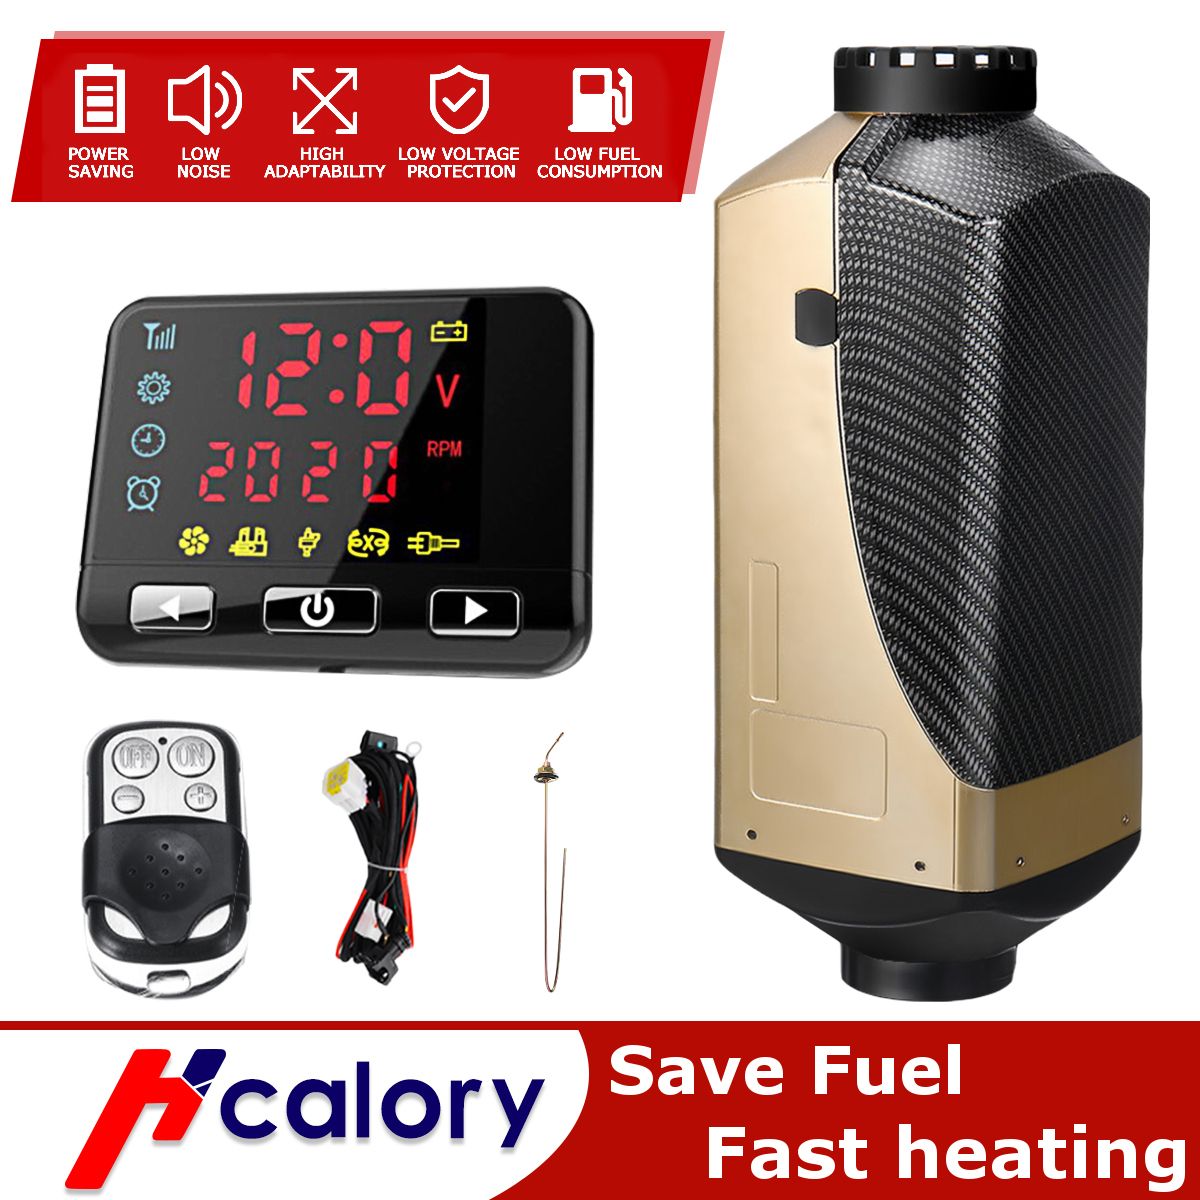 HCalory-12V-8KW-Diesel-Air-Heater-Car-Parking-Heater-LCD-Display-Remote-Control-with-Accessories-Kit-1588114